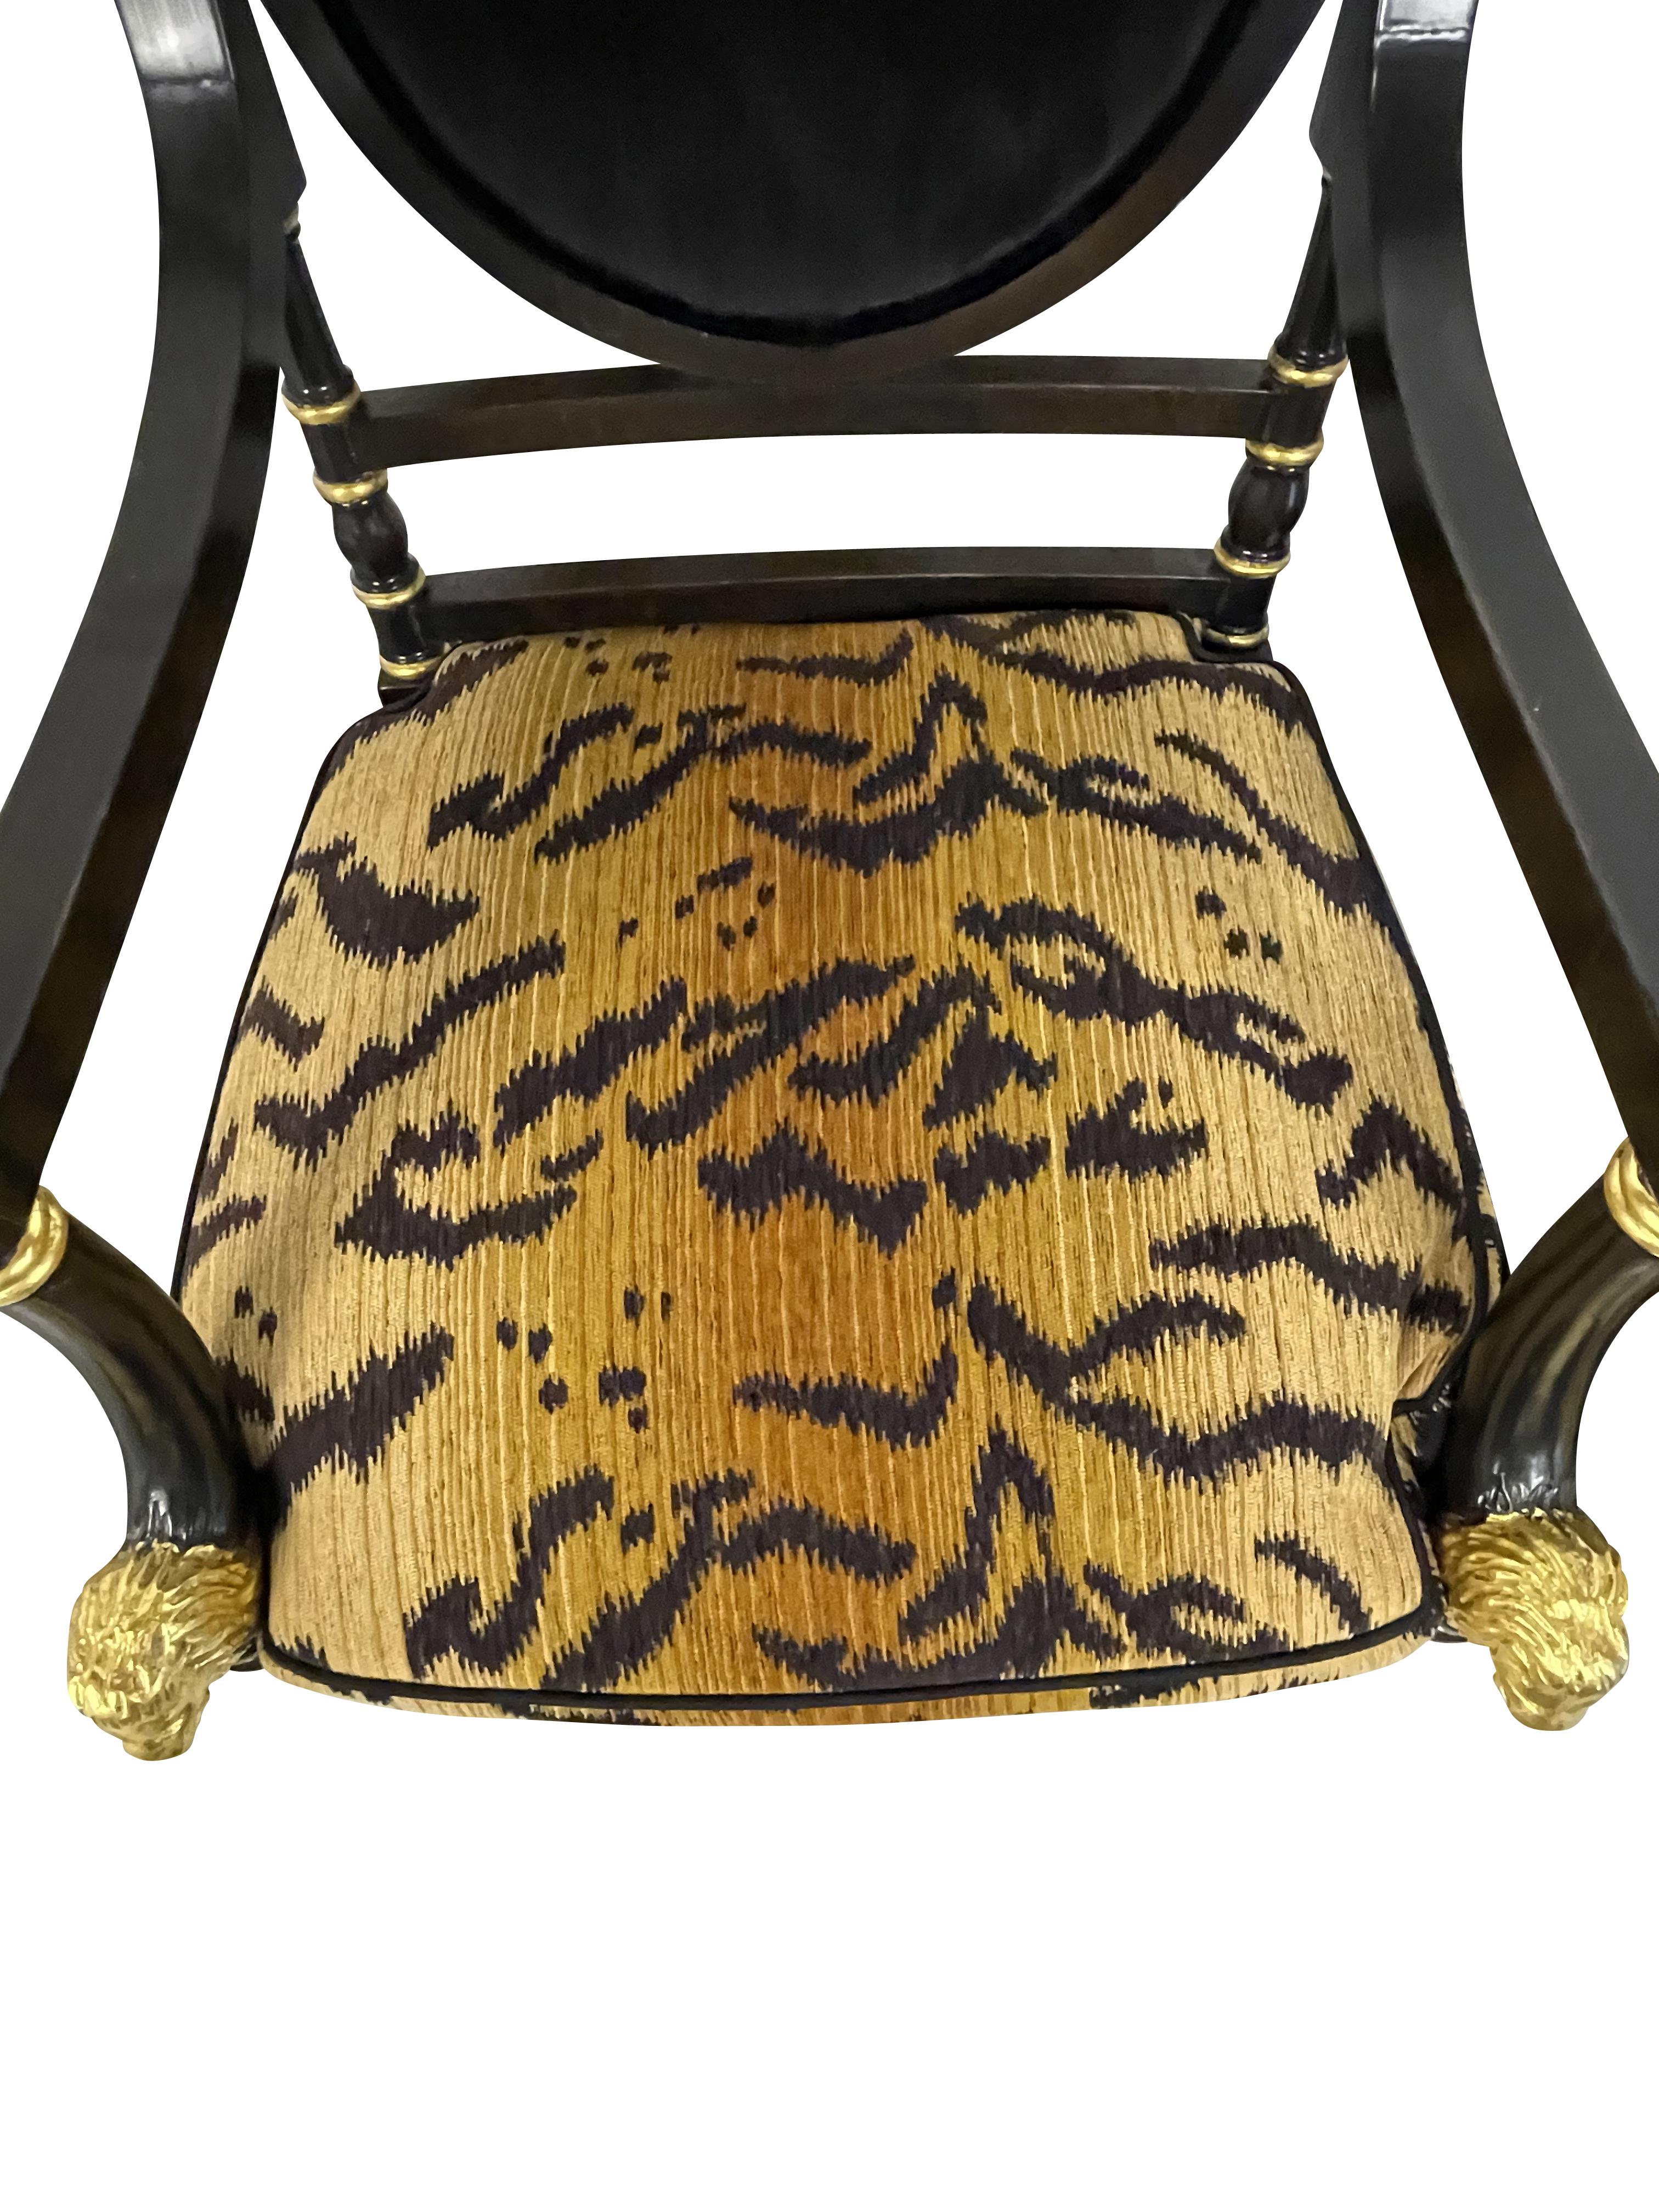 Painted Regency Style Black Ebonized and Gilt Decorated Chairs with Animal Print Cushion